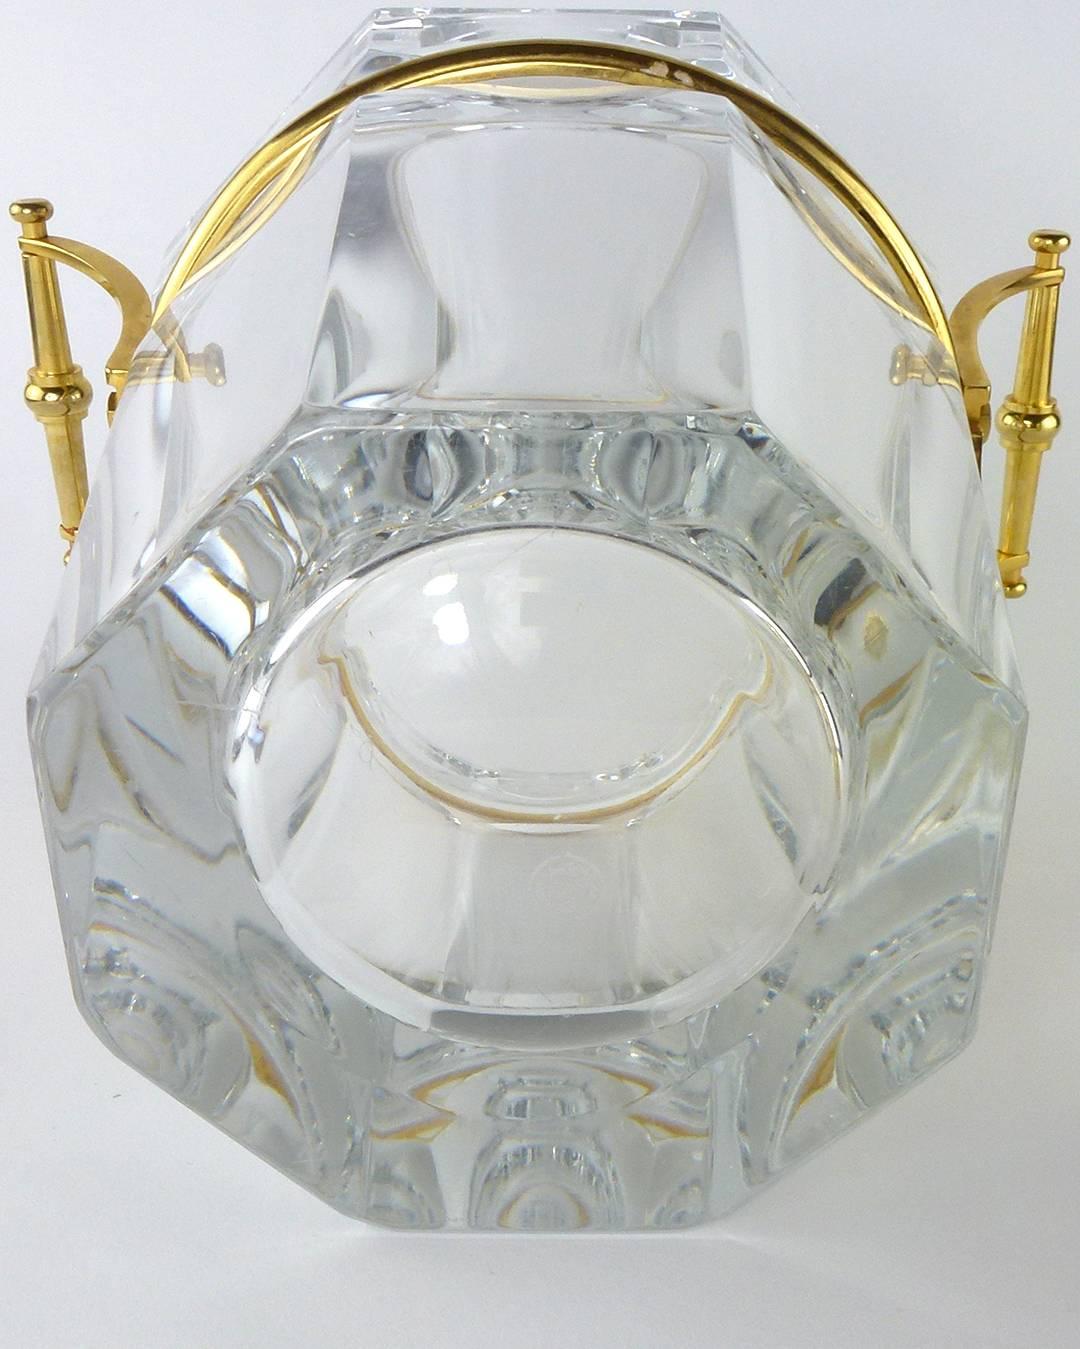 Baccarat crystal harcourt pattern Moulin Rouge Champagne cooler with gold trim, handles and liner, the hexagonal body with squared stirrup-style handles, pierced cylindrical bottle holder and trim in gold. 

This is the ultra luxurious champagne